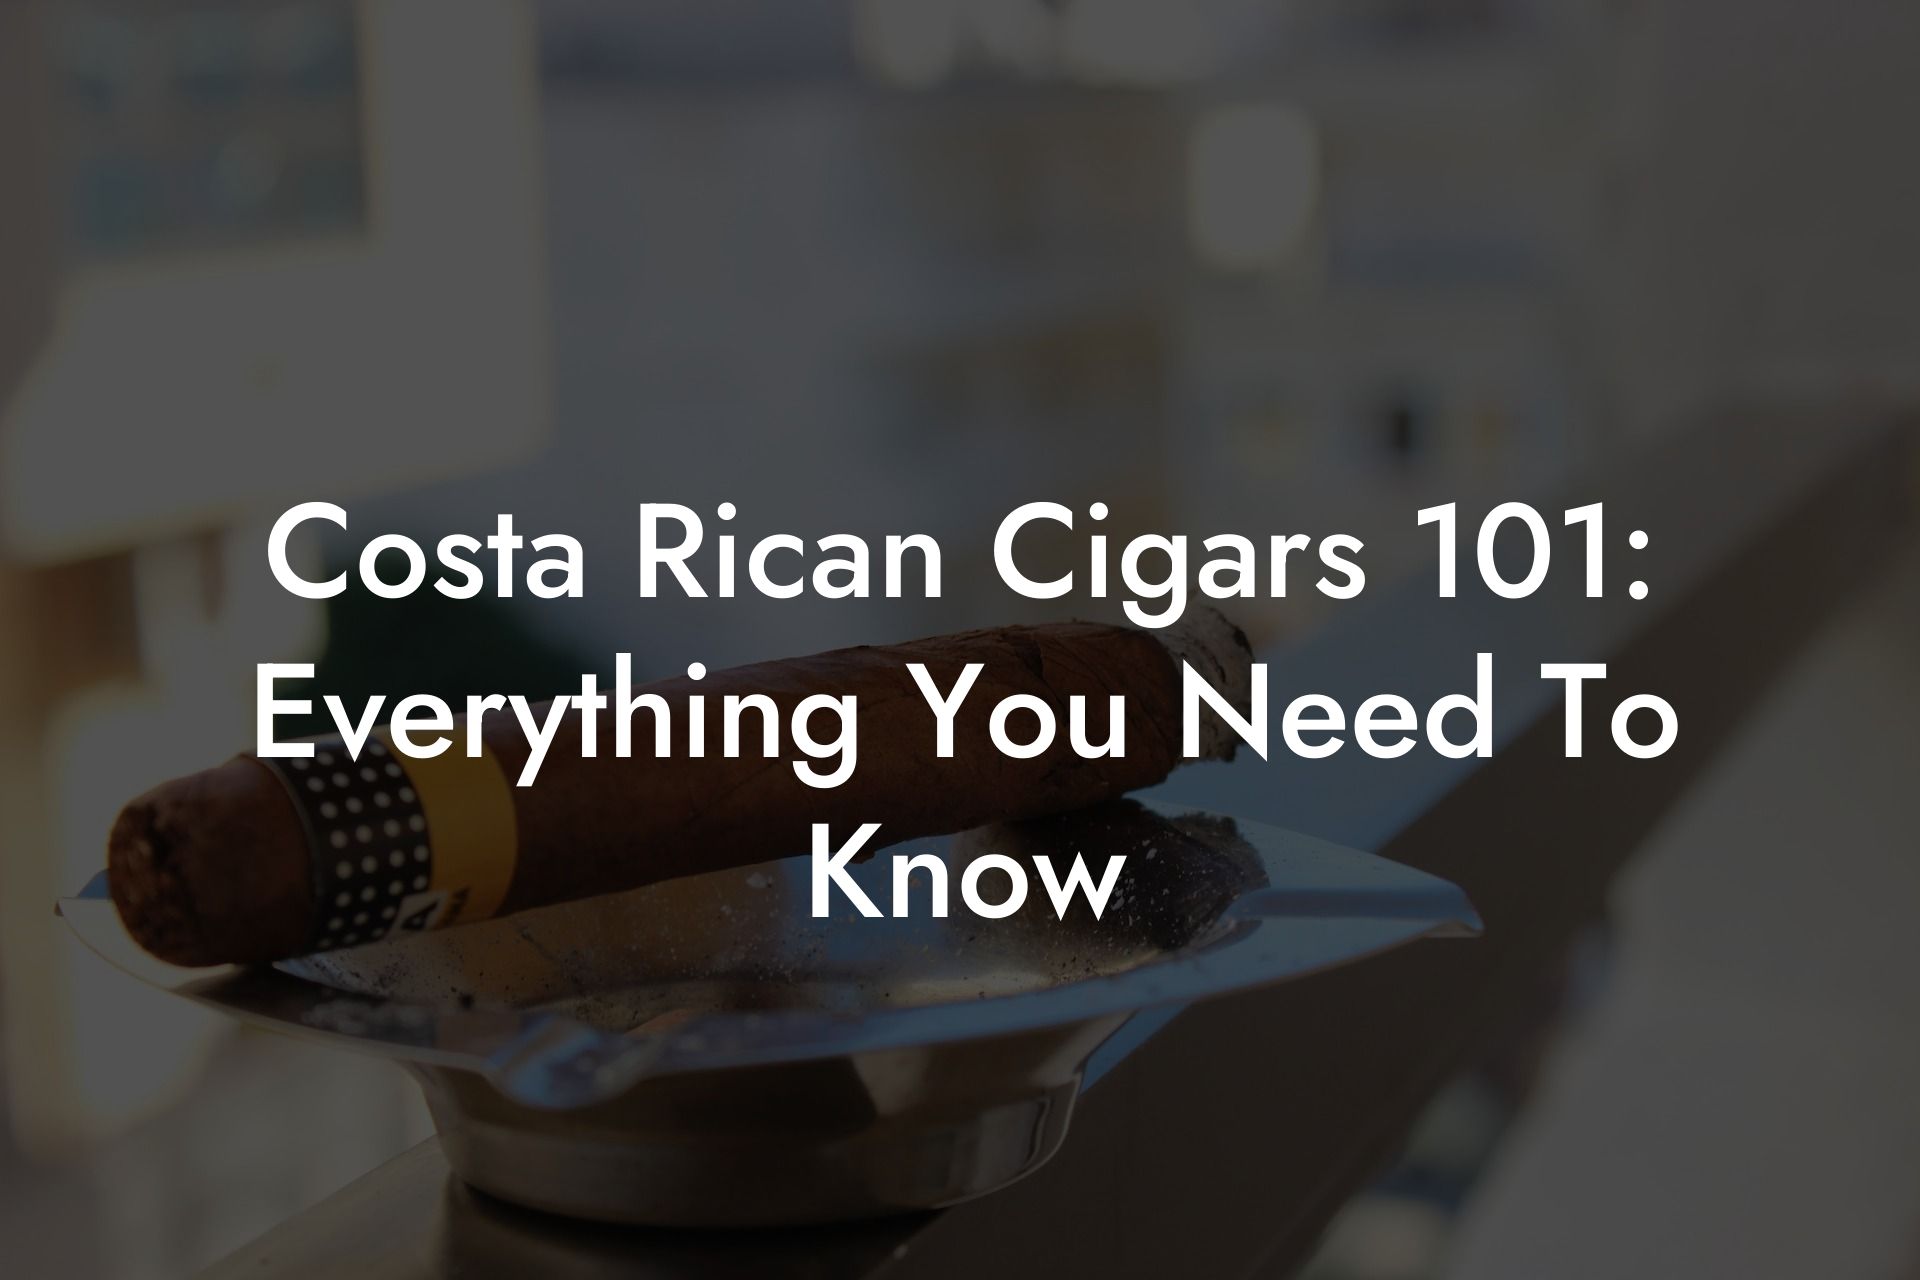 Costa Rican Cigars 101: Everything You Need To Know